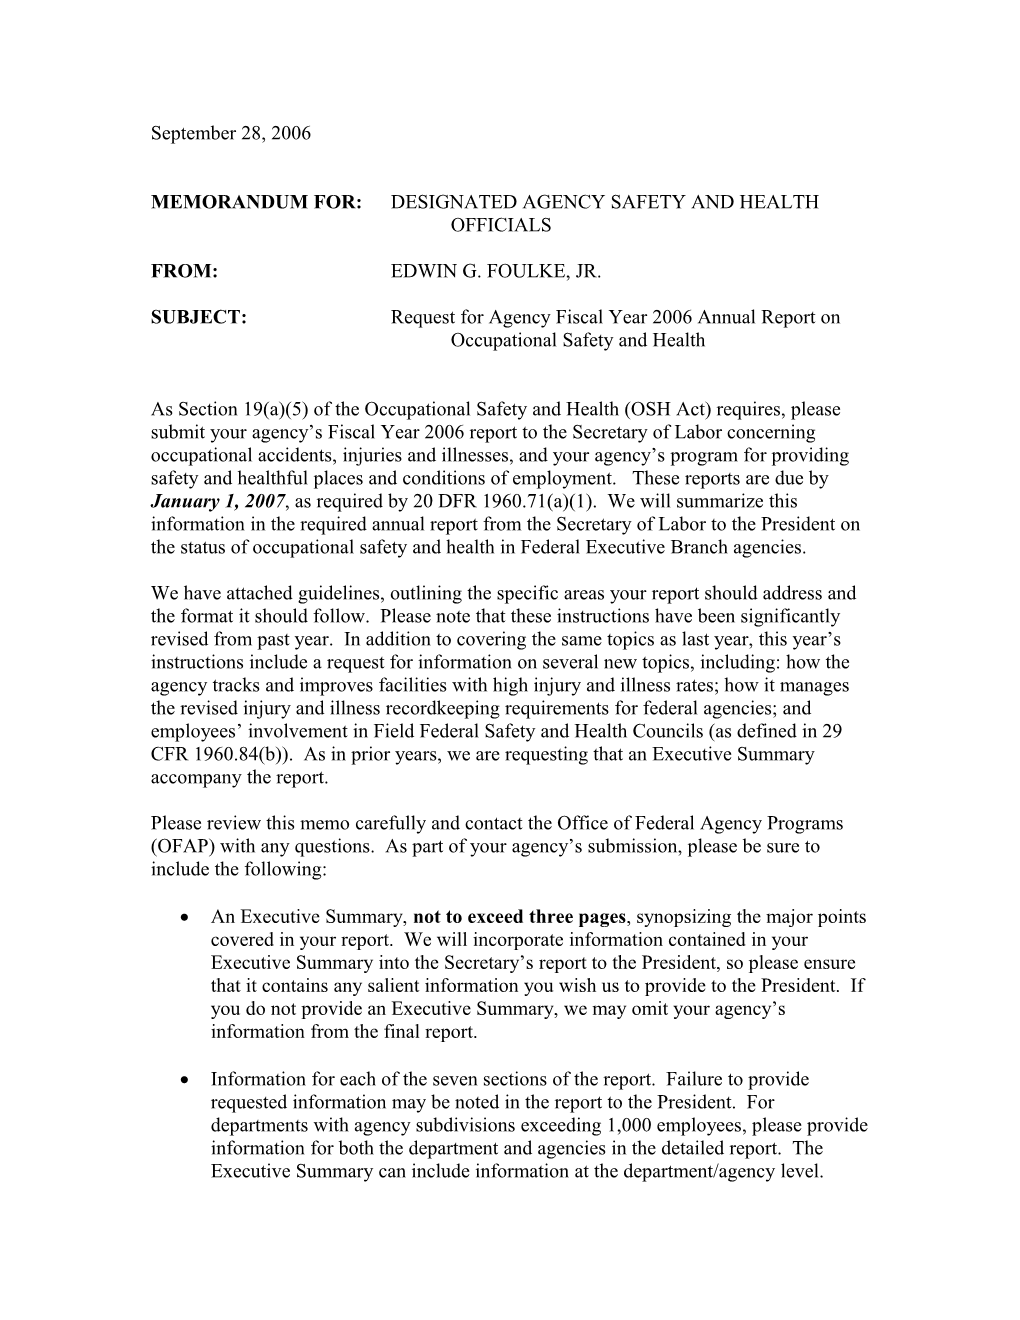 Memorandum For:Designated Agency Safety and Health Officials